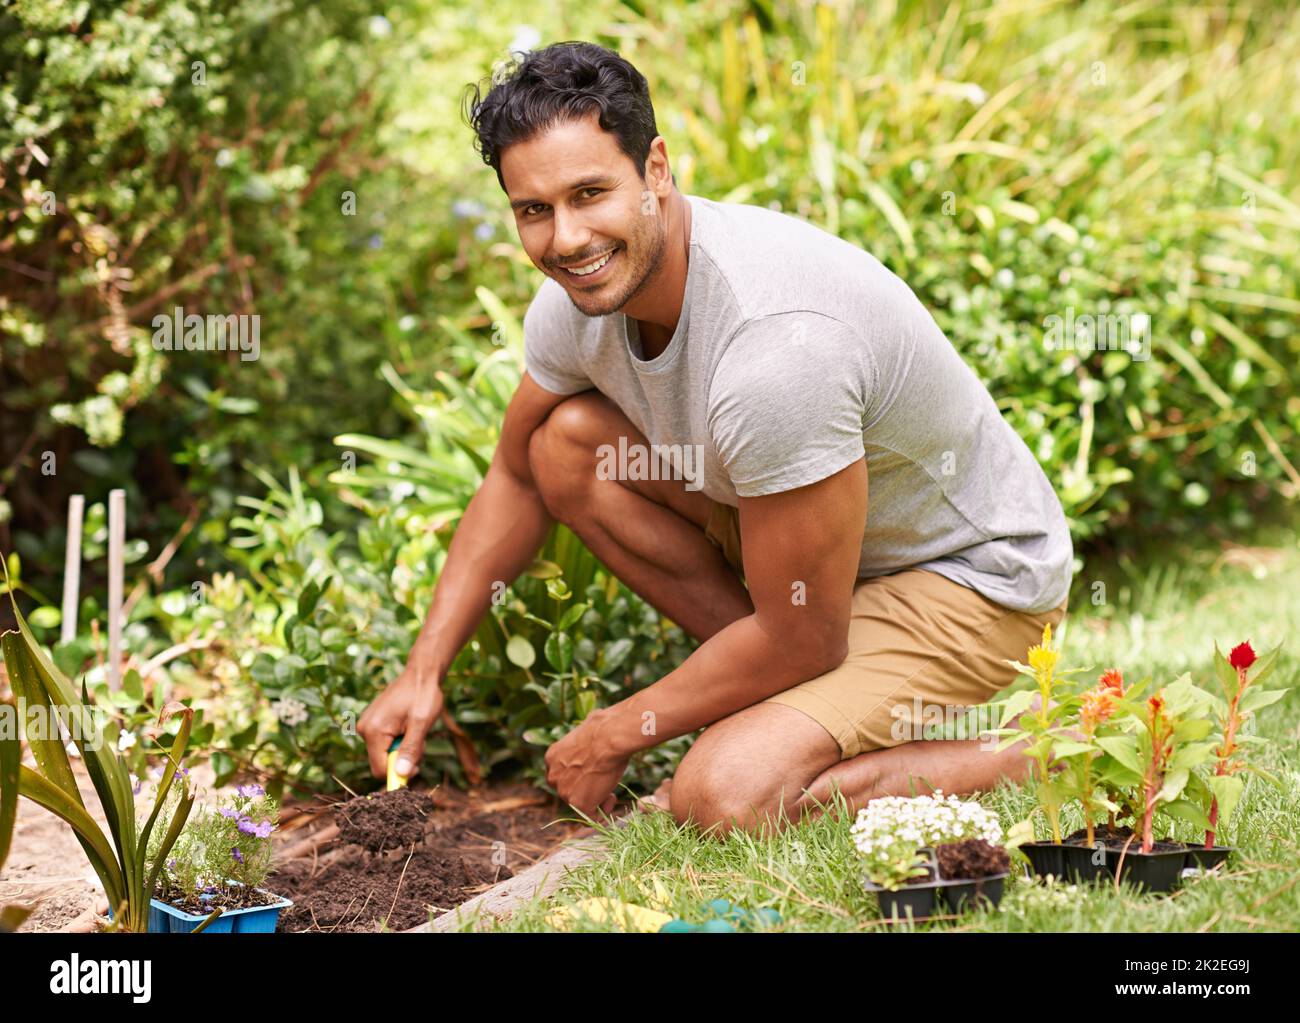 Gardening is so relaxing and rewarding. Portrait of a handsome young man working in his garden. Stock Photo